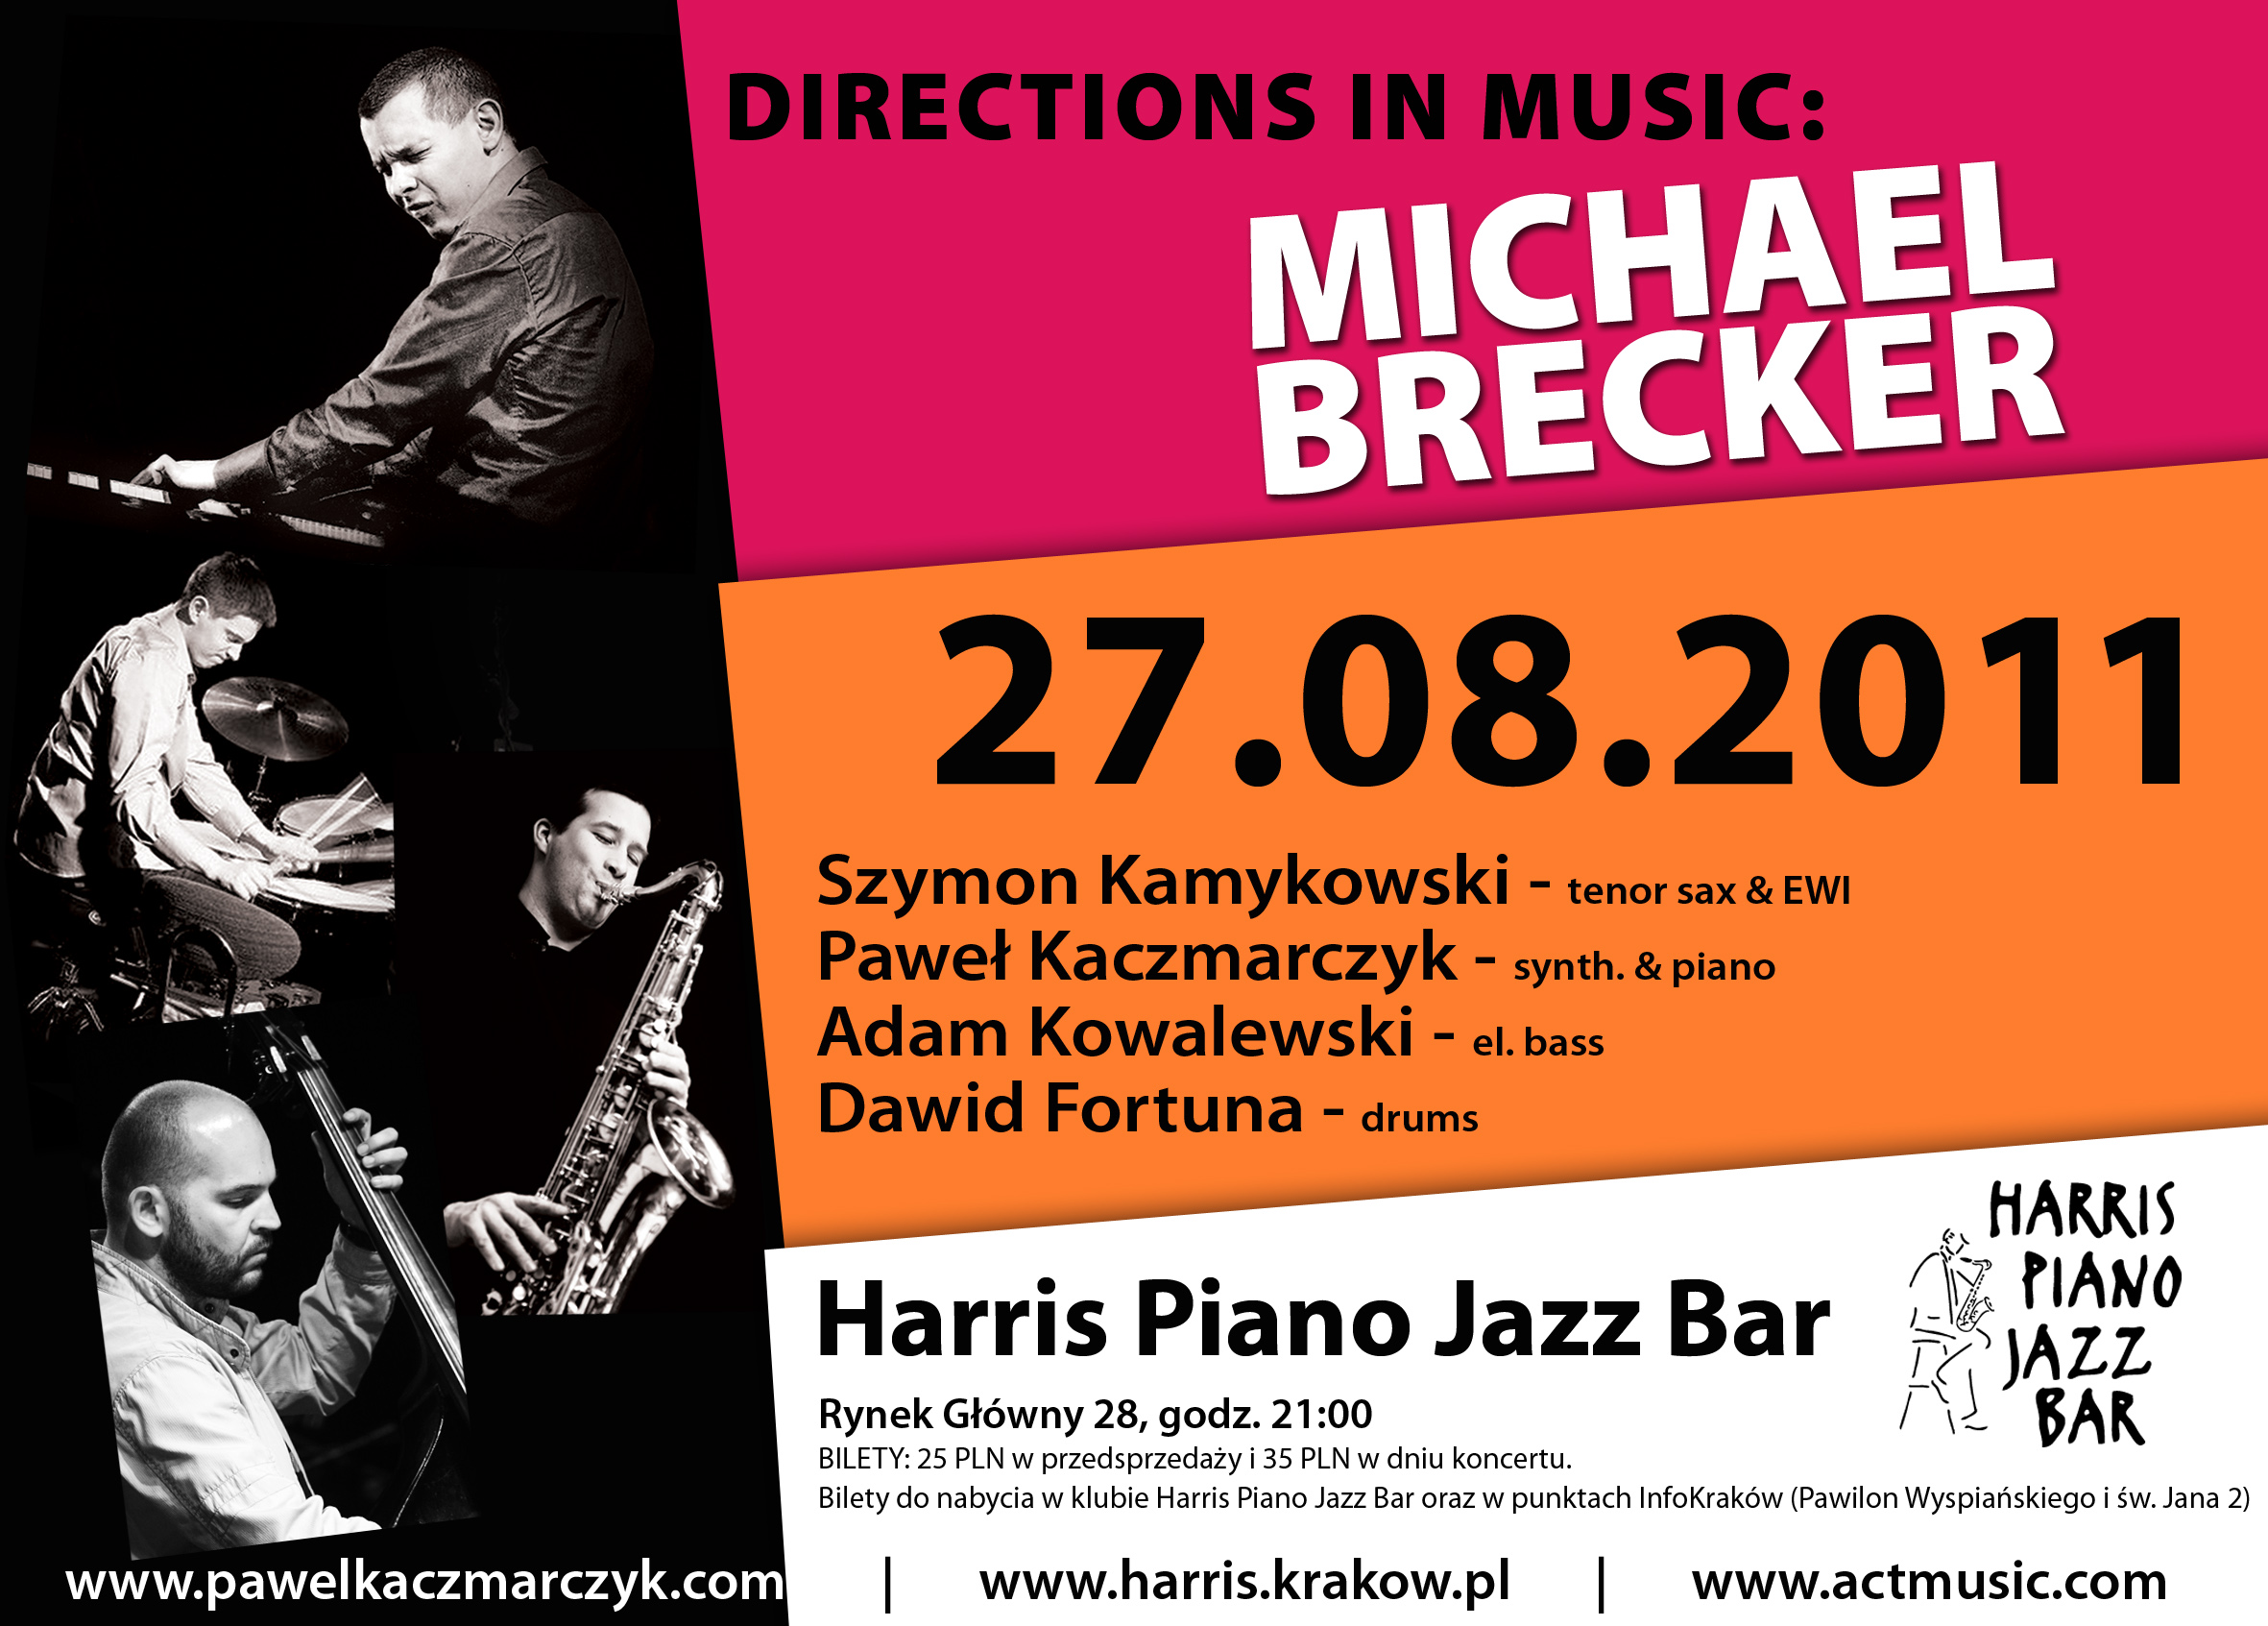 Directions in music: Michael Brecker